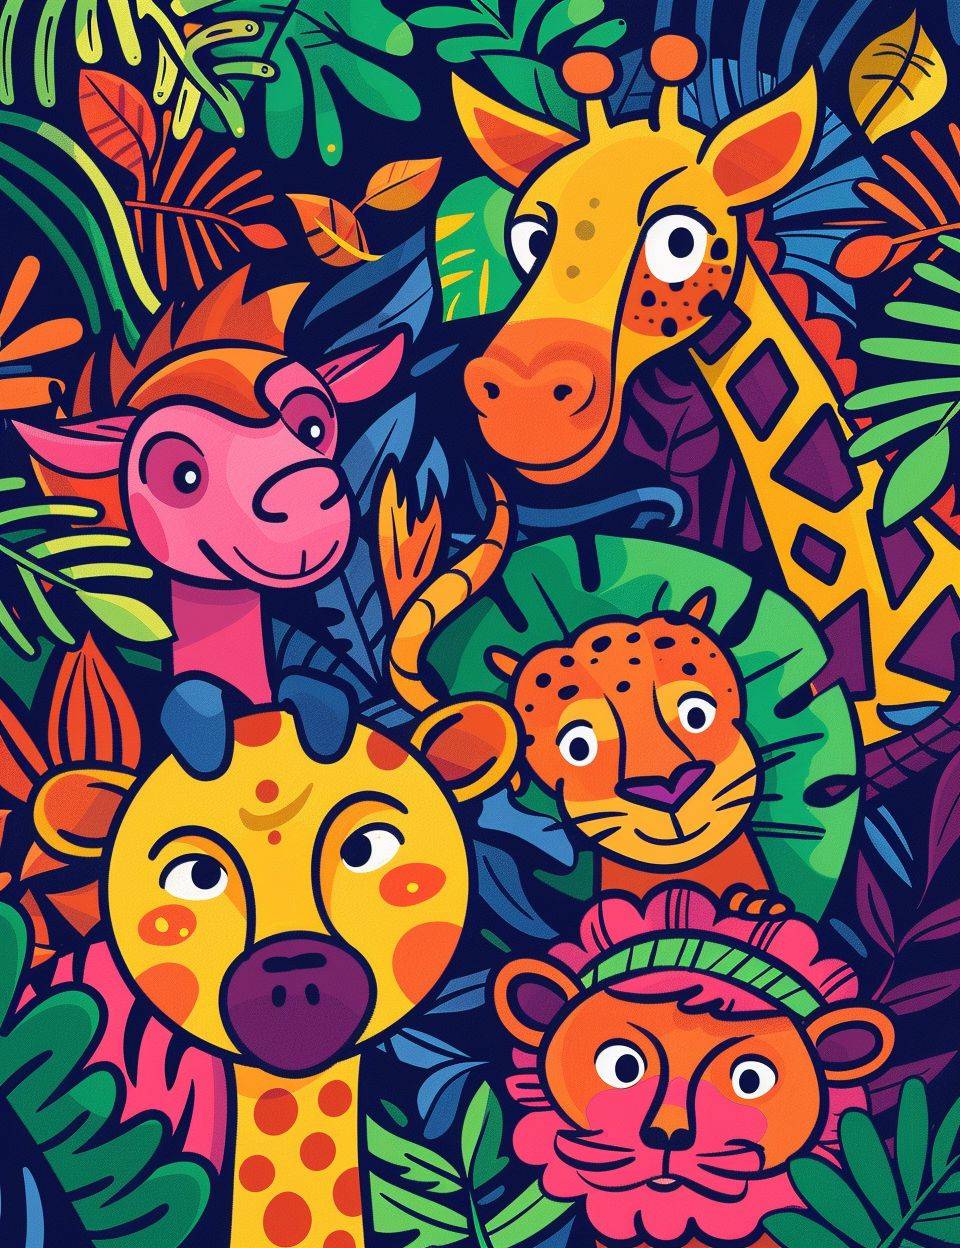 Colorful illustration of animals and babies, no text in image, coloring background, illustration, cover